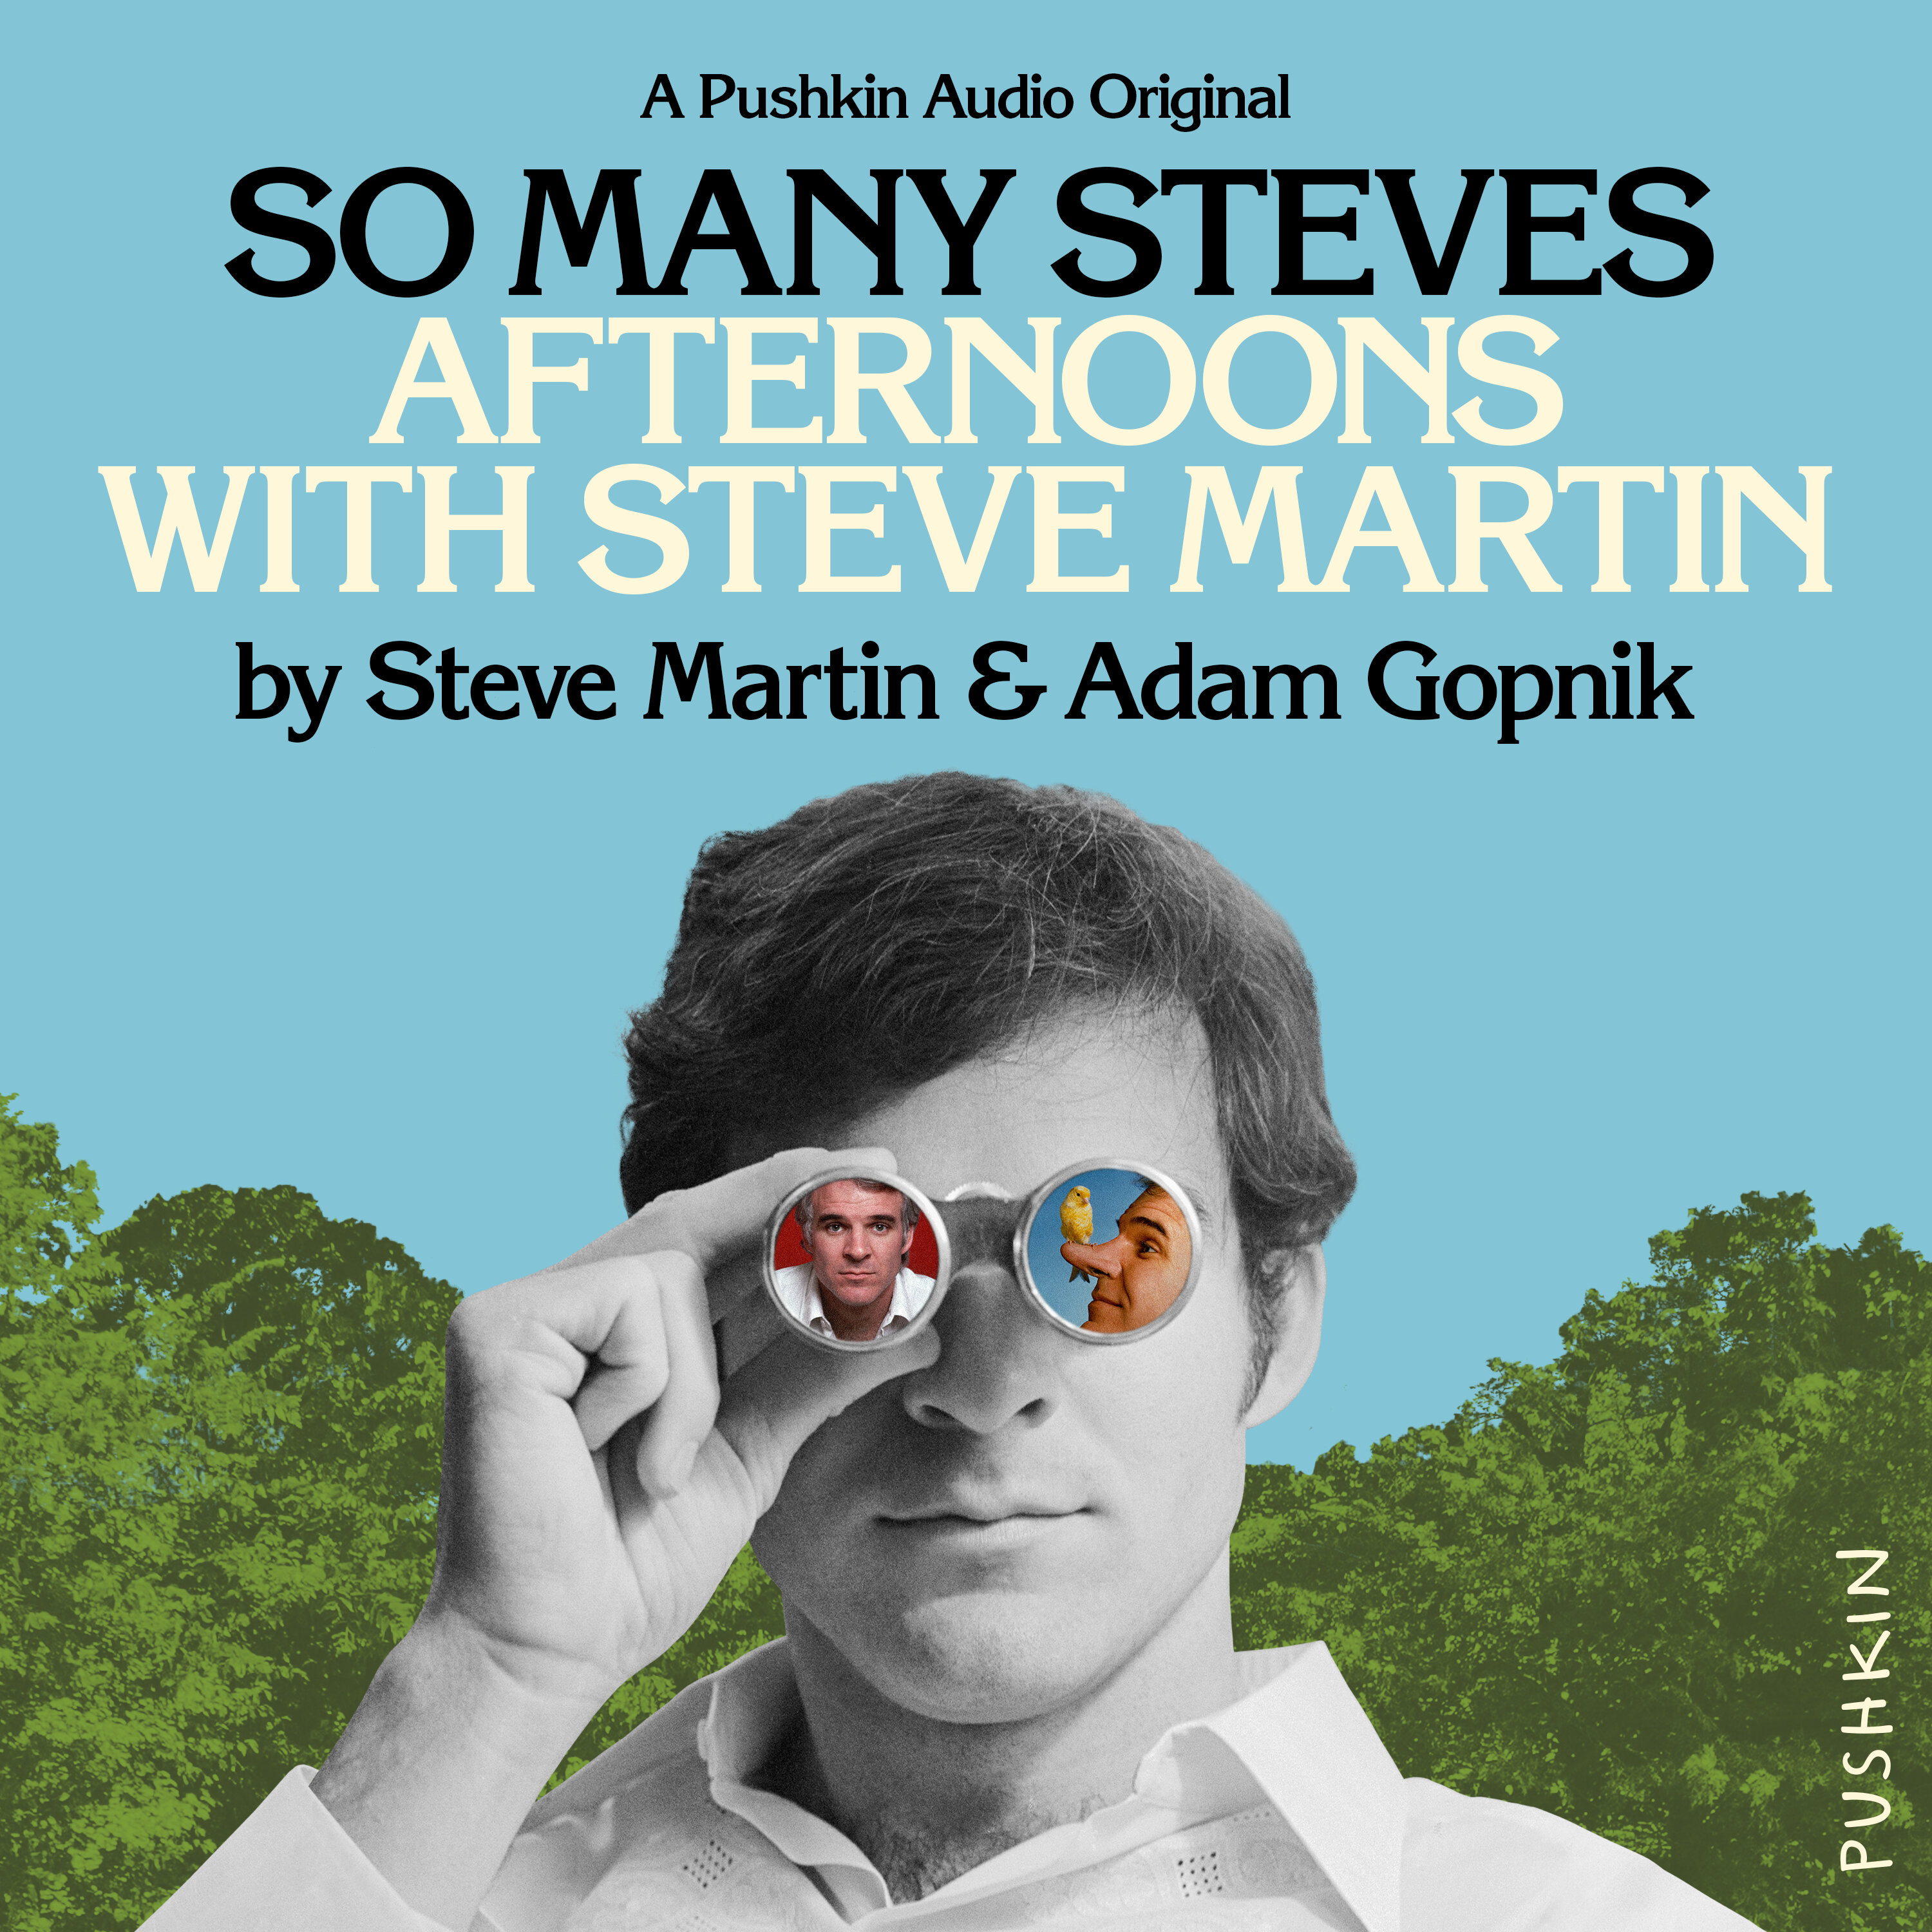 Introducing So Many Steves: Afternoons with Steve Martin